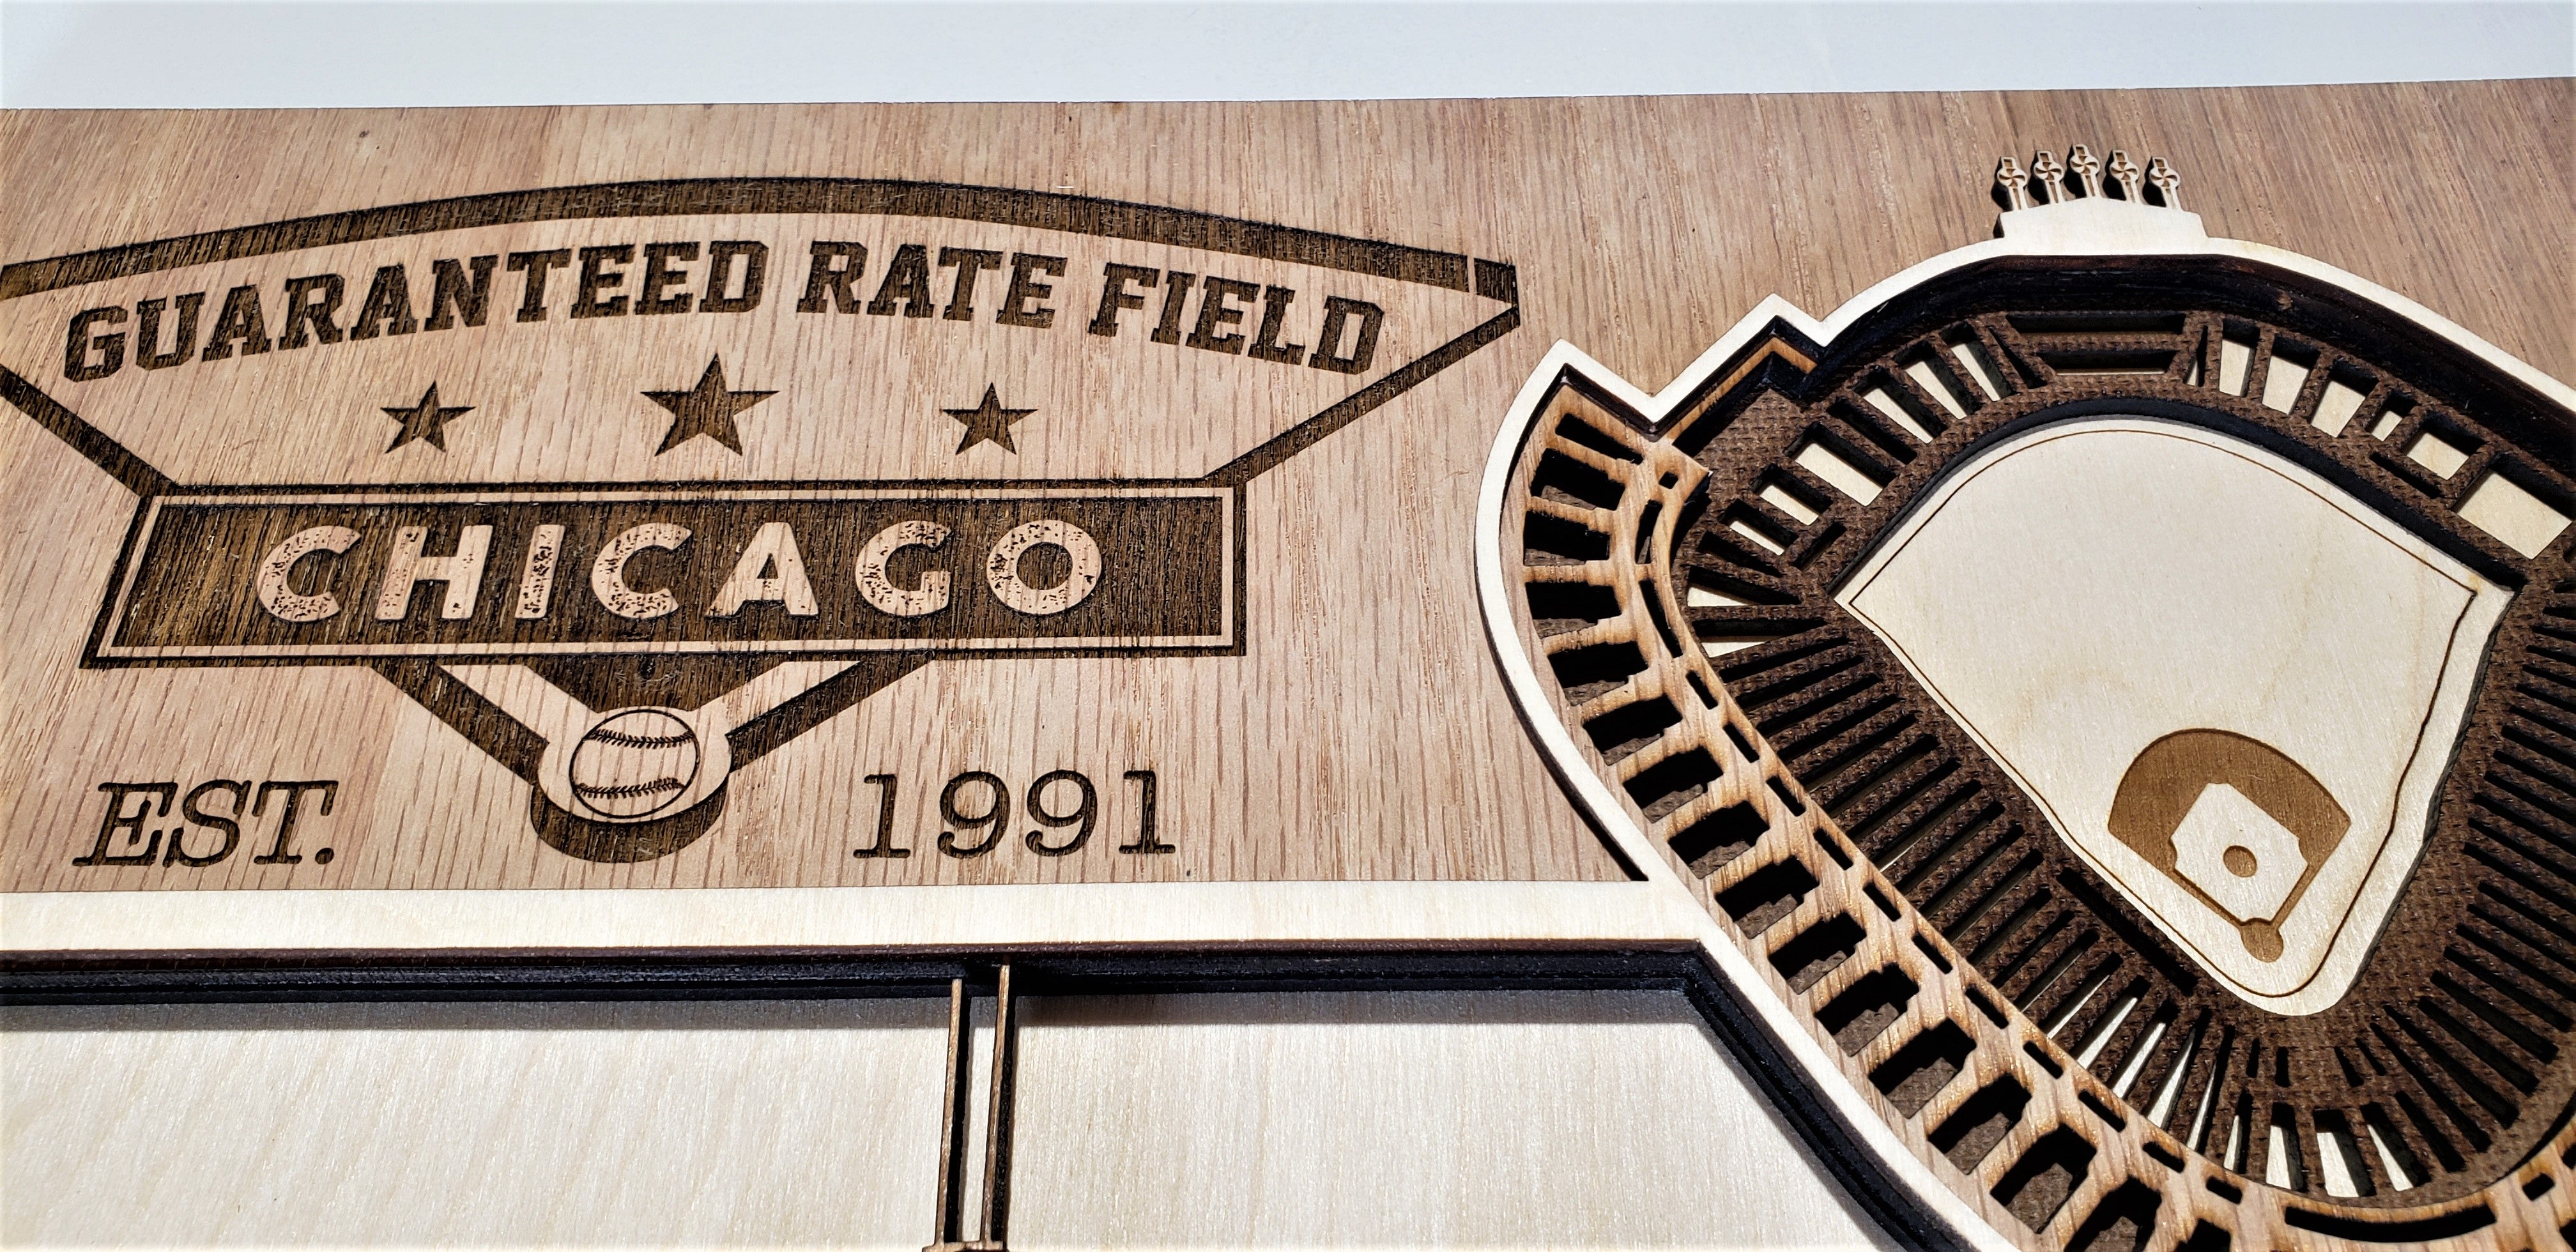 Guaranteed Rate Field - Home of the Chicago White Sox